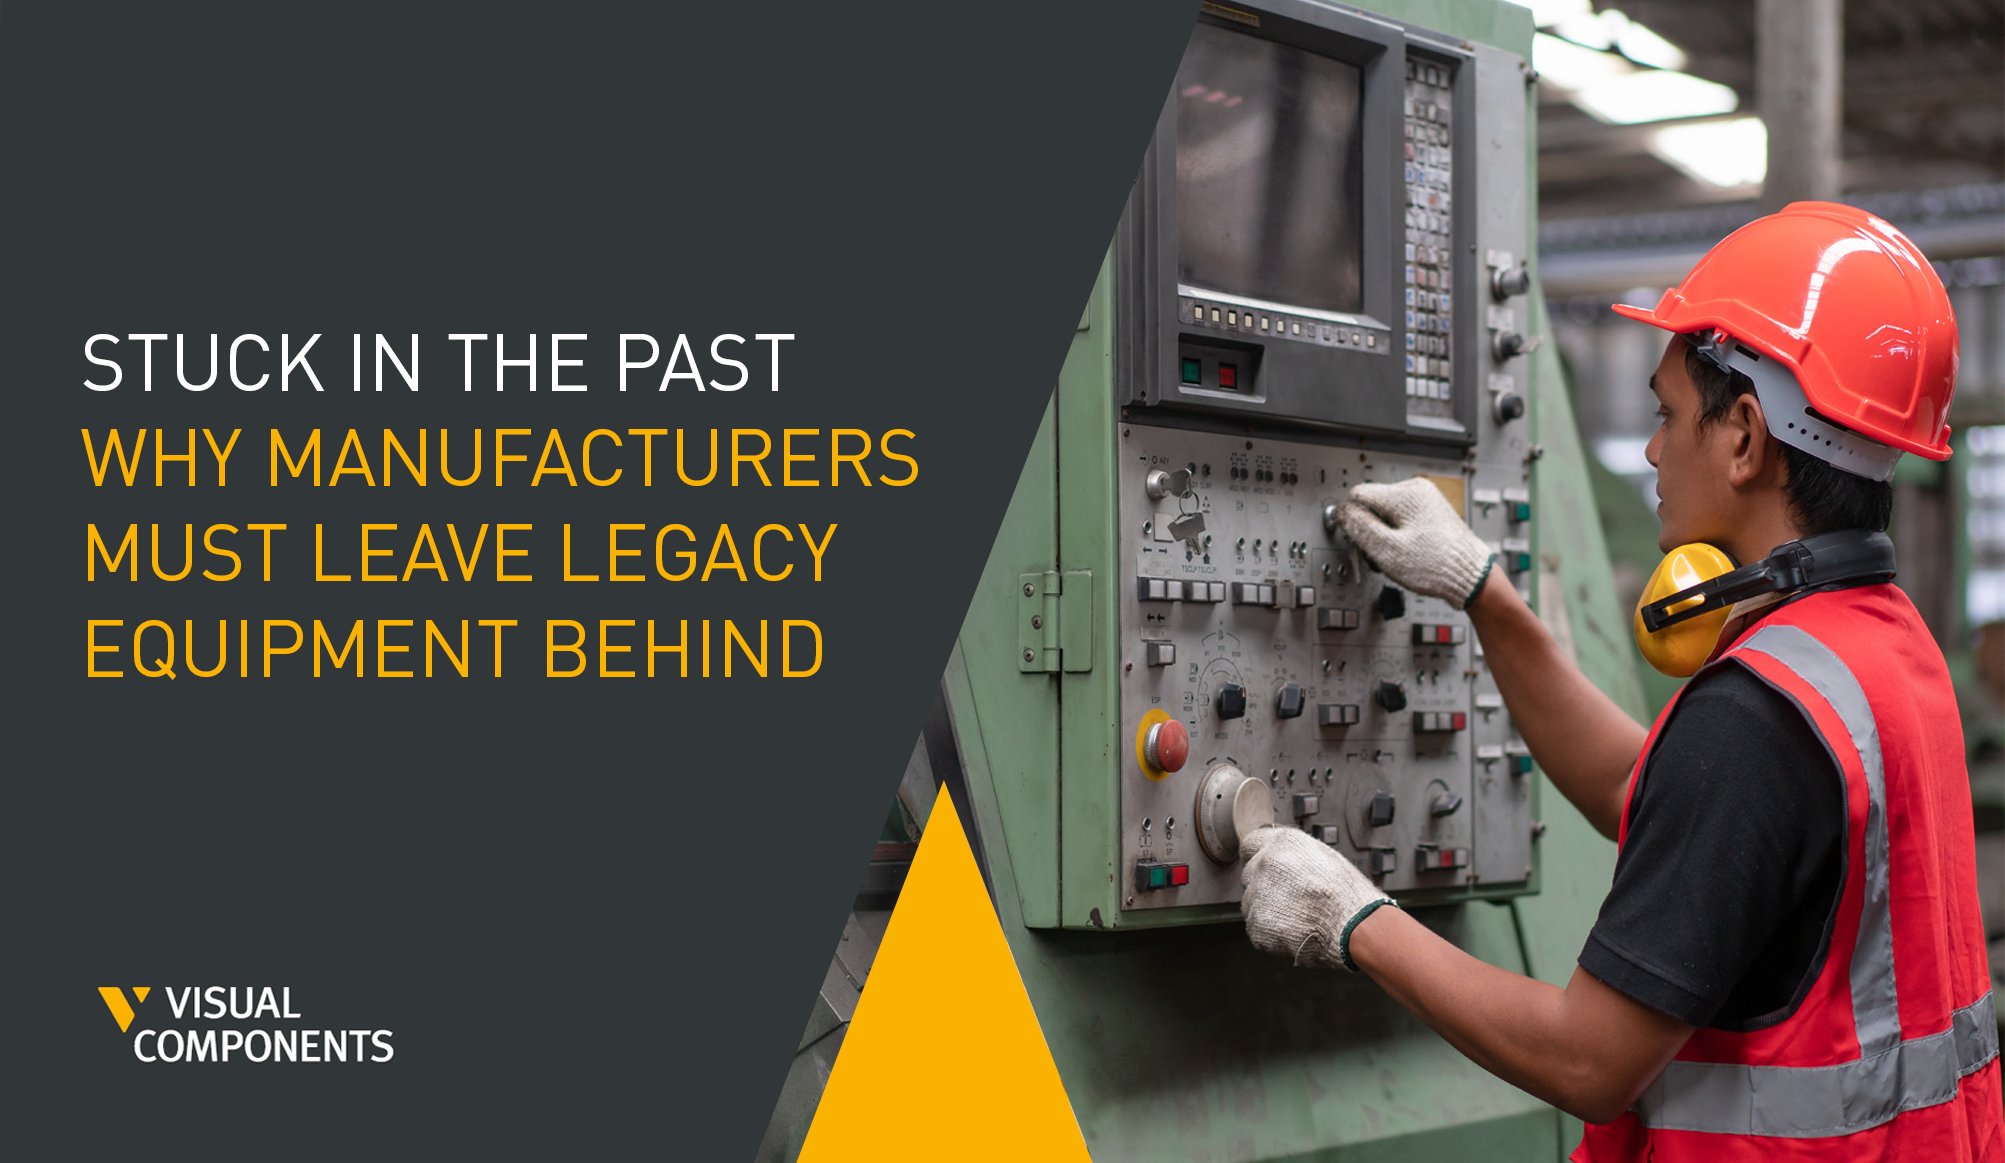 Stuck in the past - why manufacturers should leave legacy equipment behind